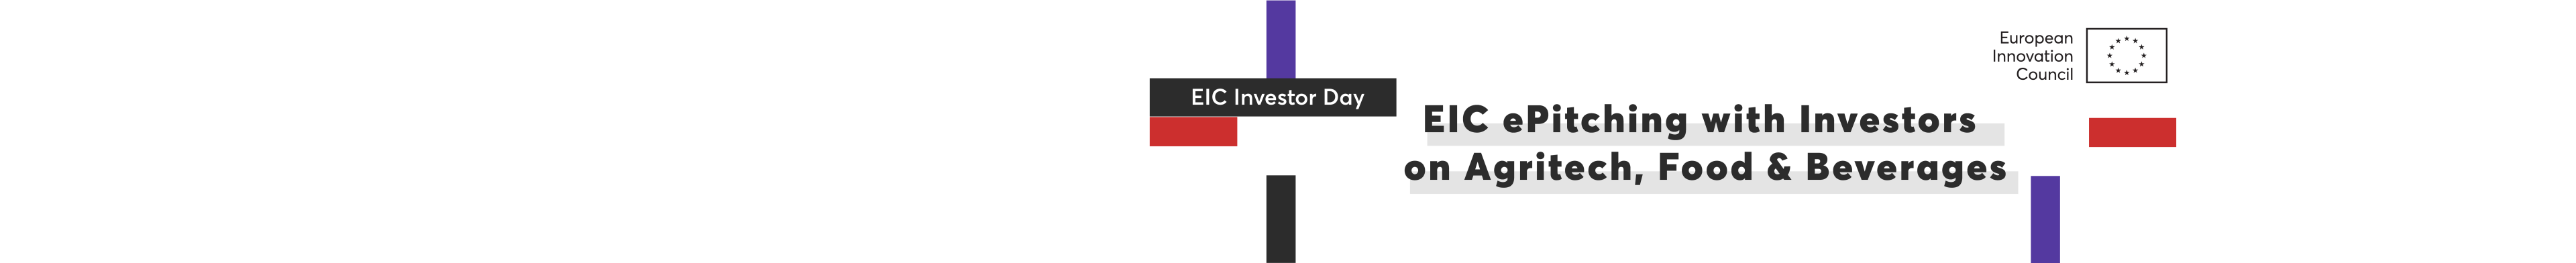 EIC ePitching Investors Agritech Community Banner